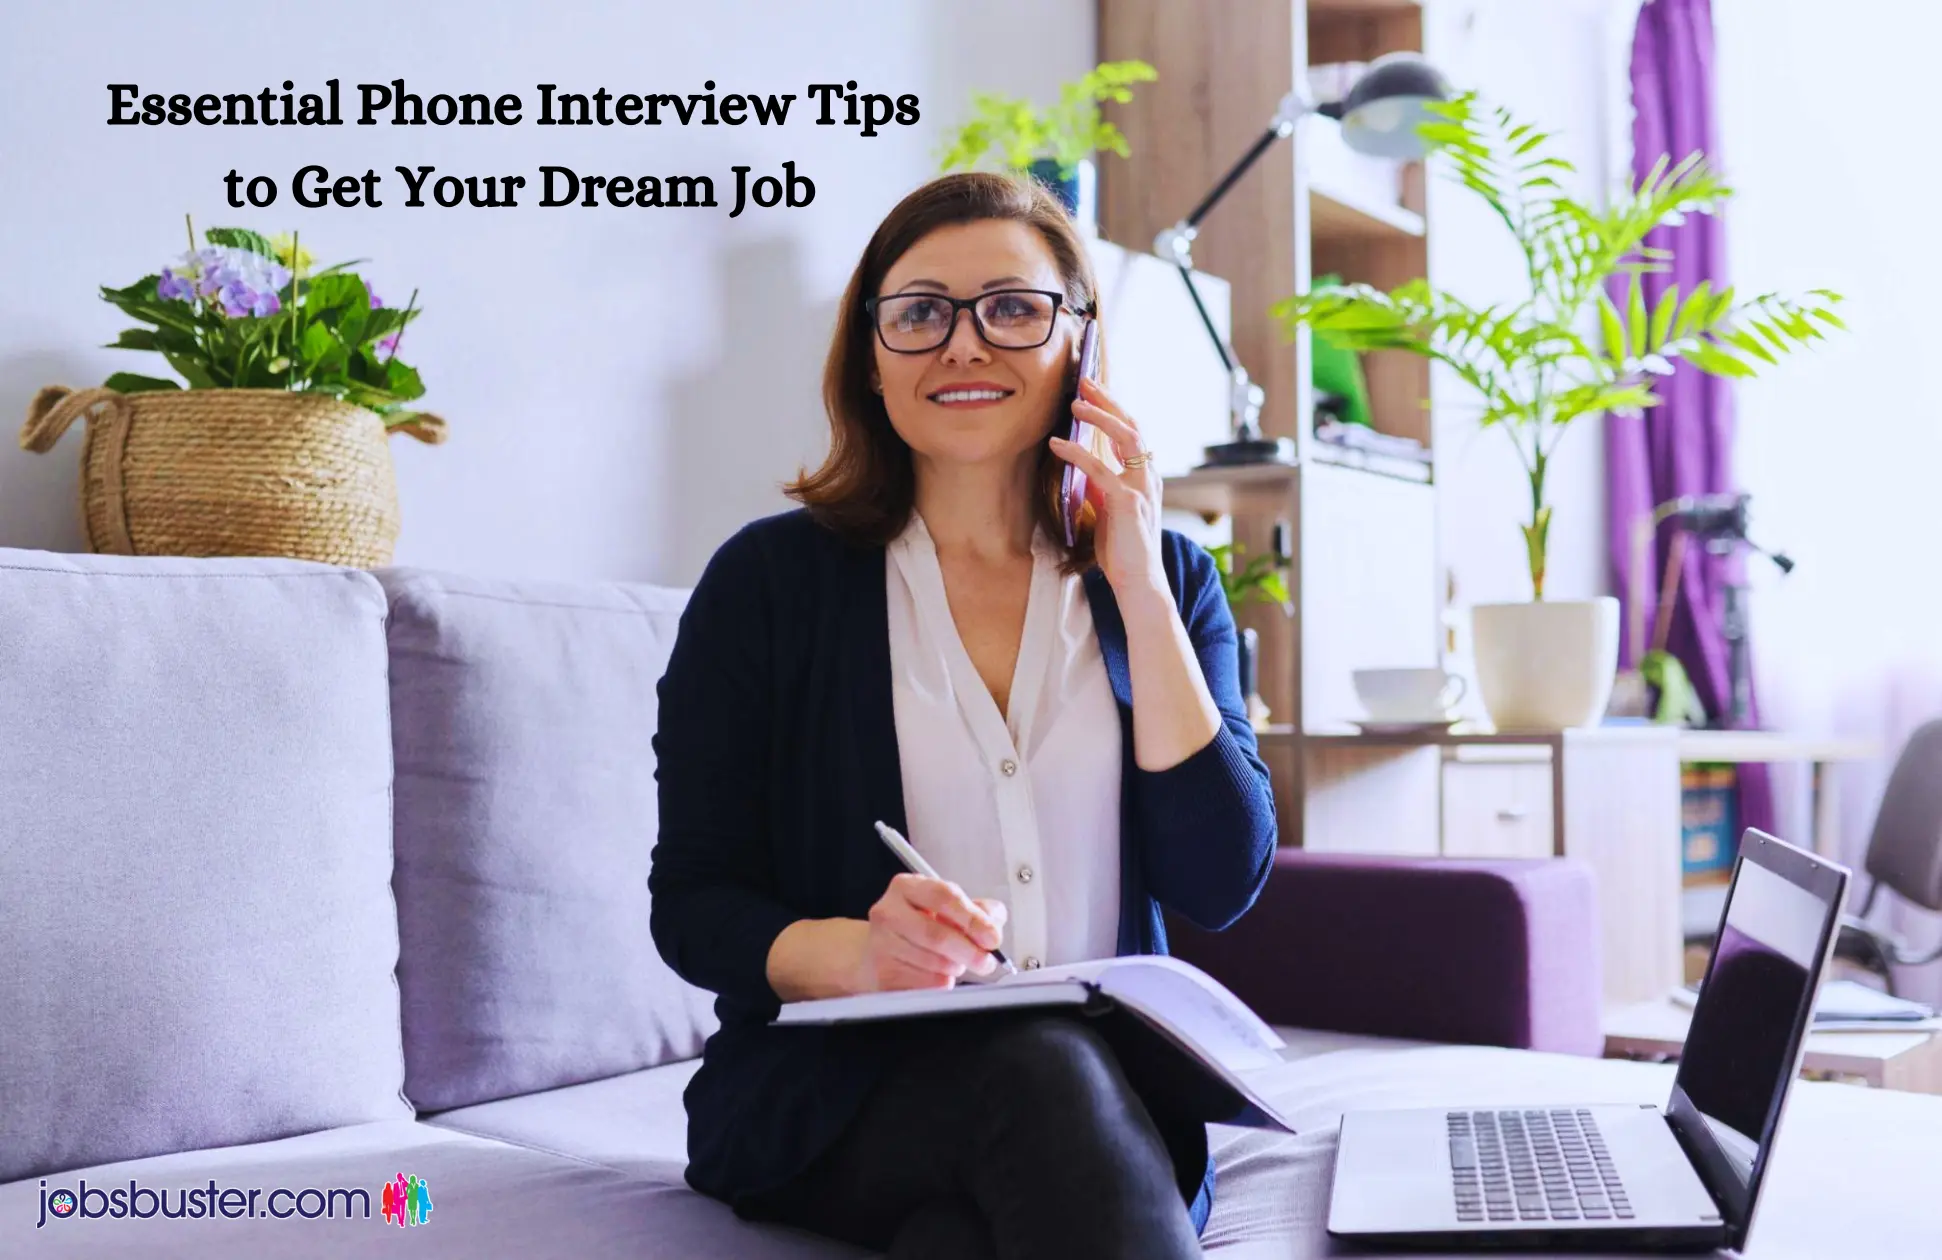 Essential Phone Interview Tips to Get Your Dream Job